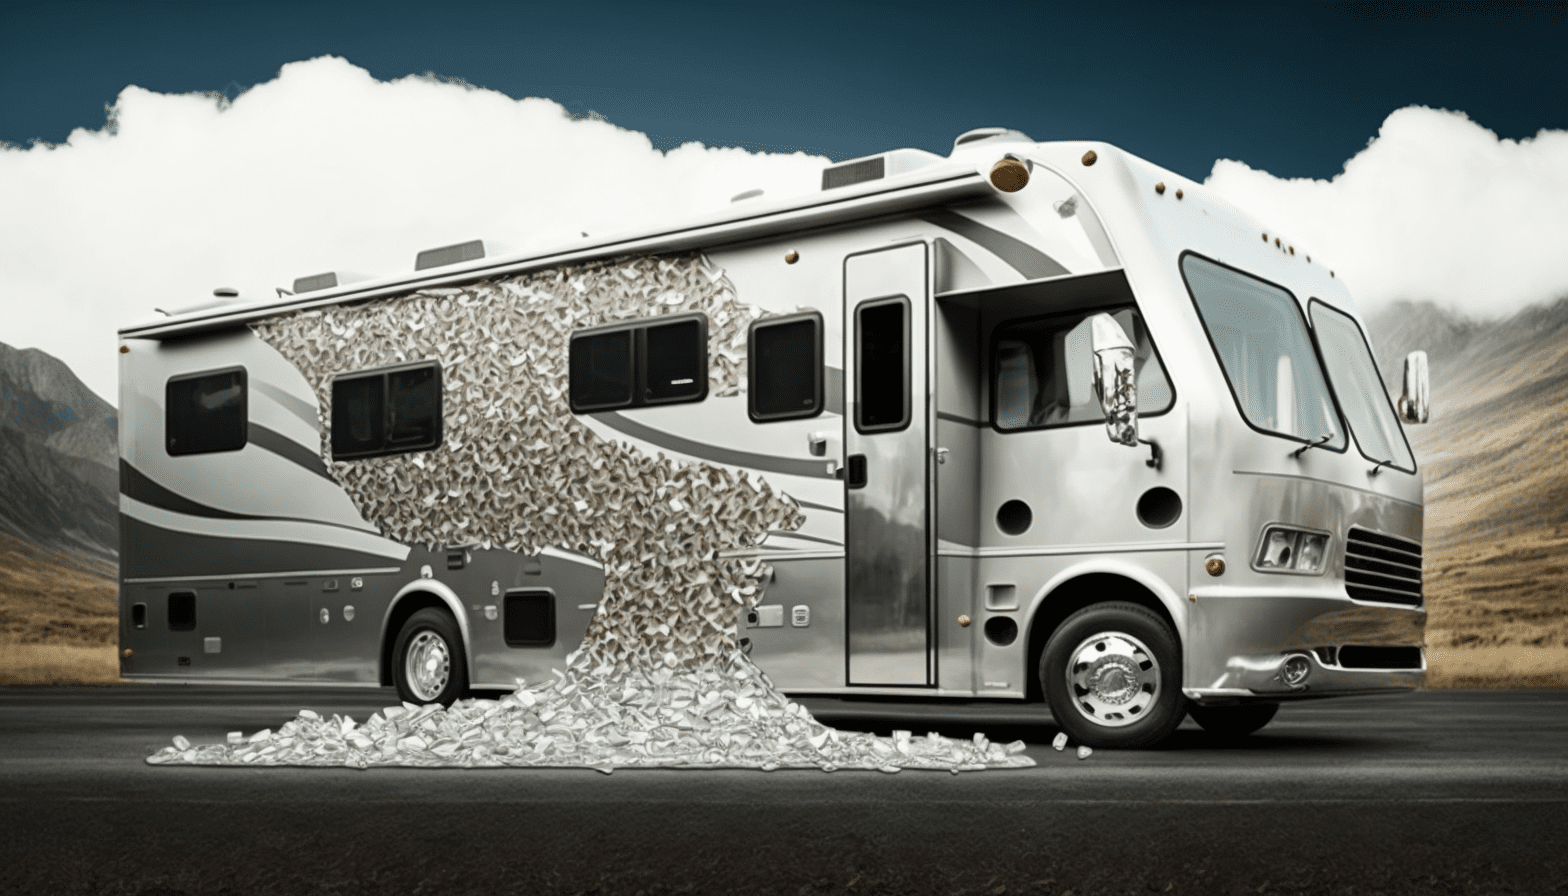 How to Make Money (and Have Fun) Working While Traveling in an RV